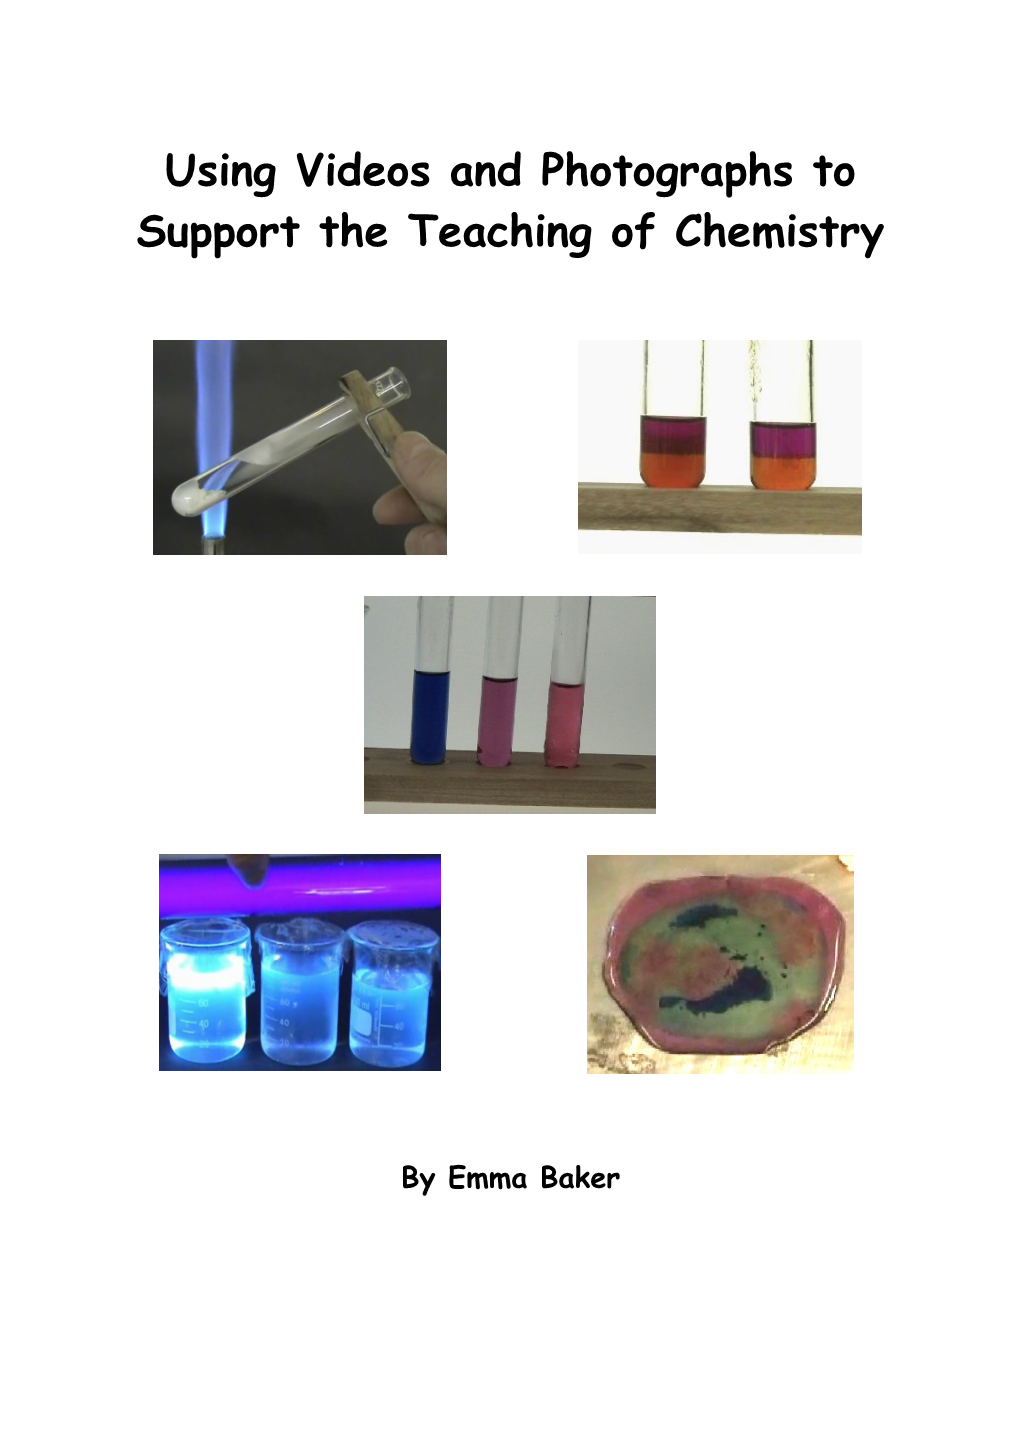 How Can We Use Chemistry Videos and Photographs to Improve Teaching and Learning